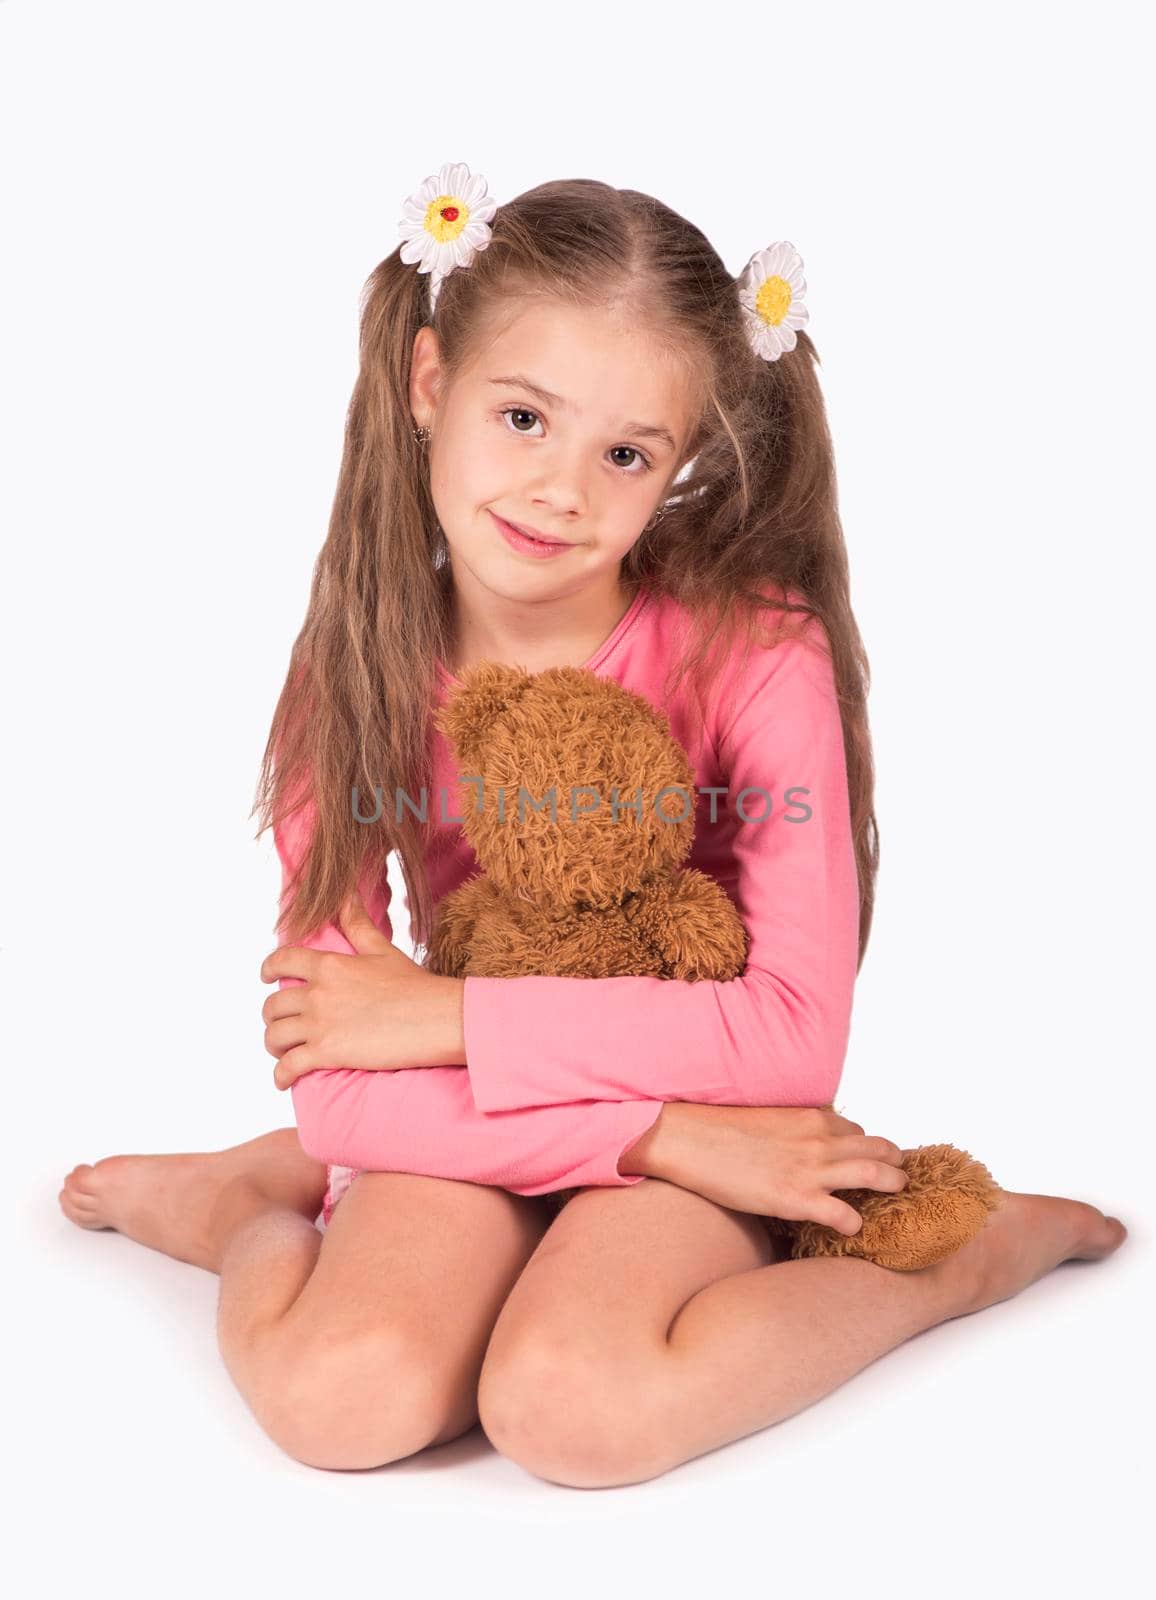 Happy girl with teddy bears isolated on white background by aprilphoto